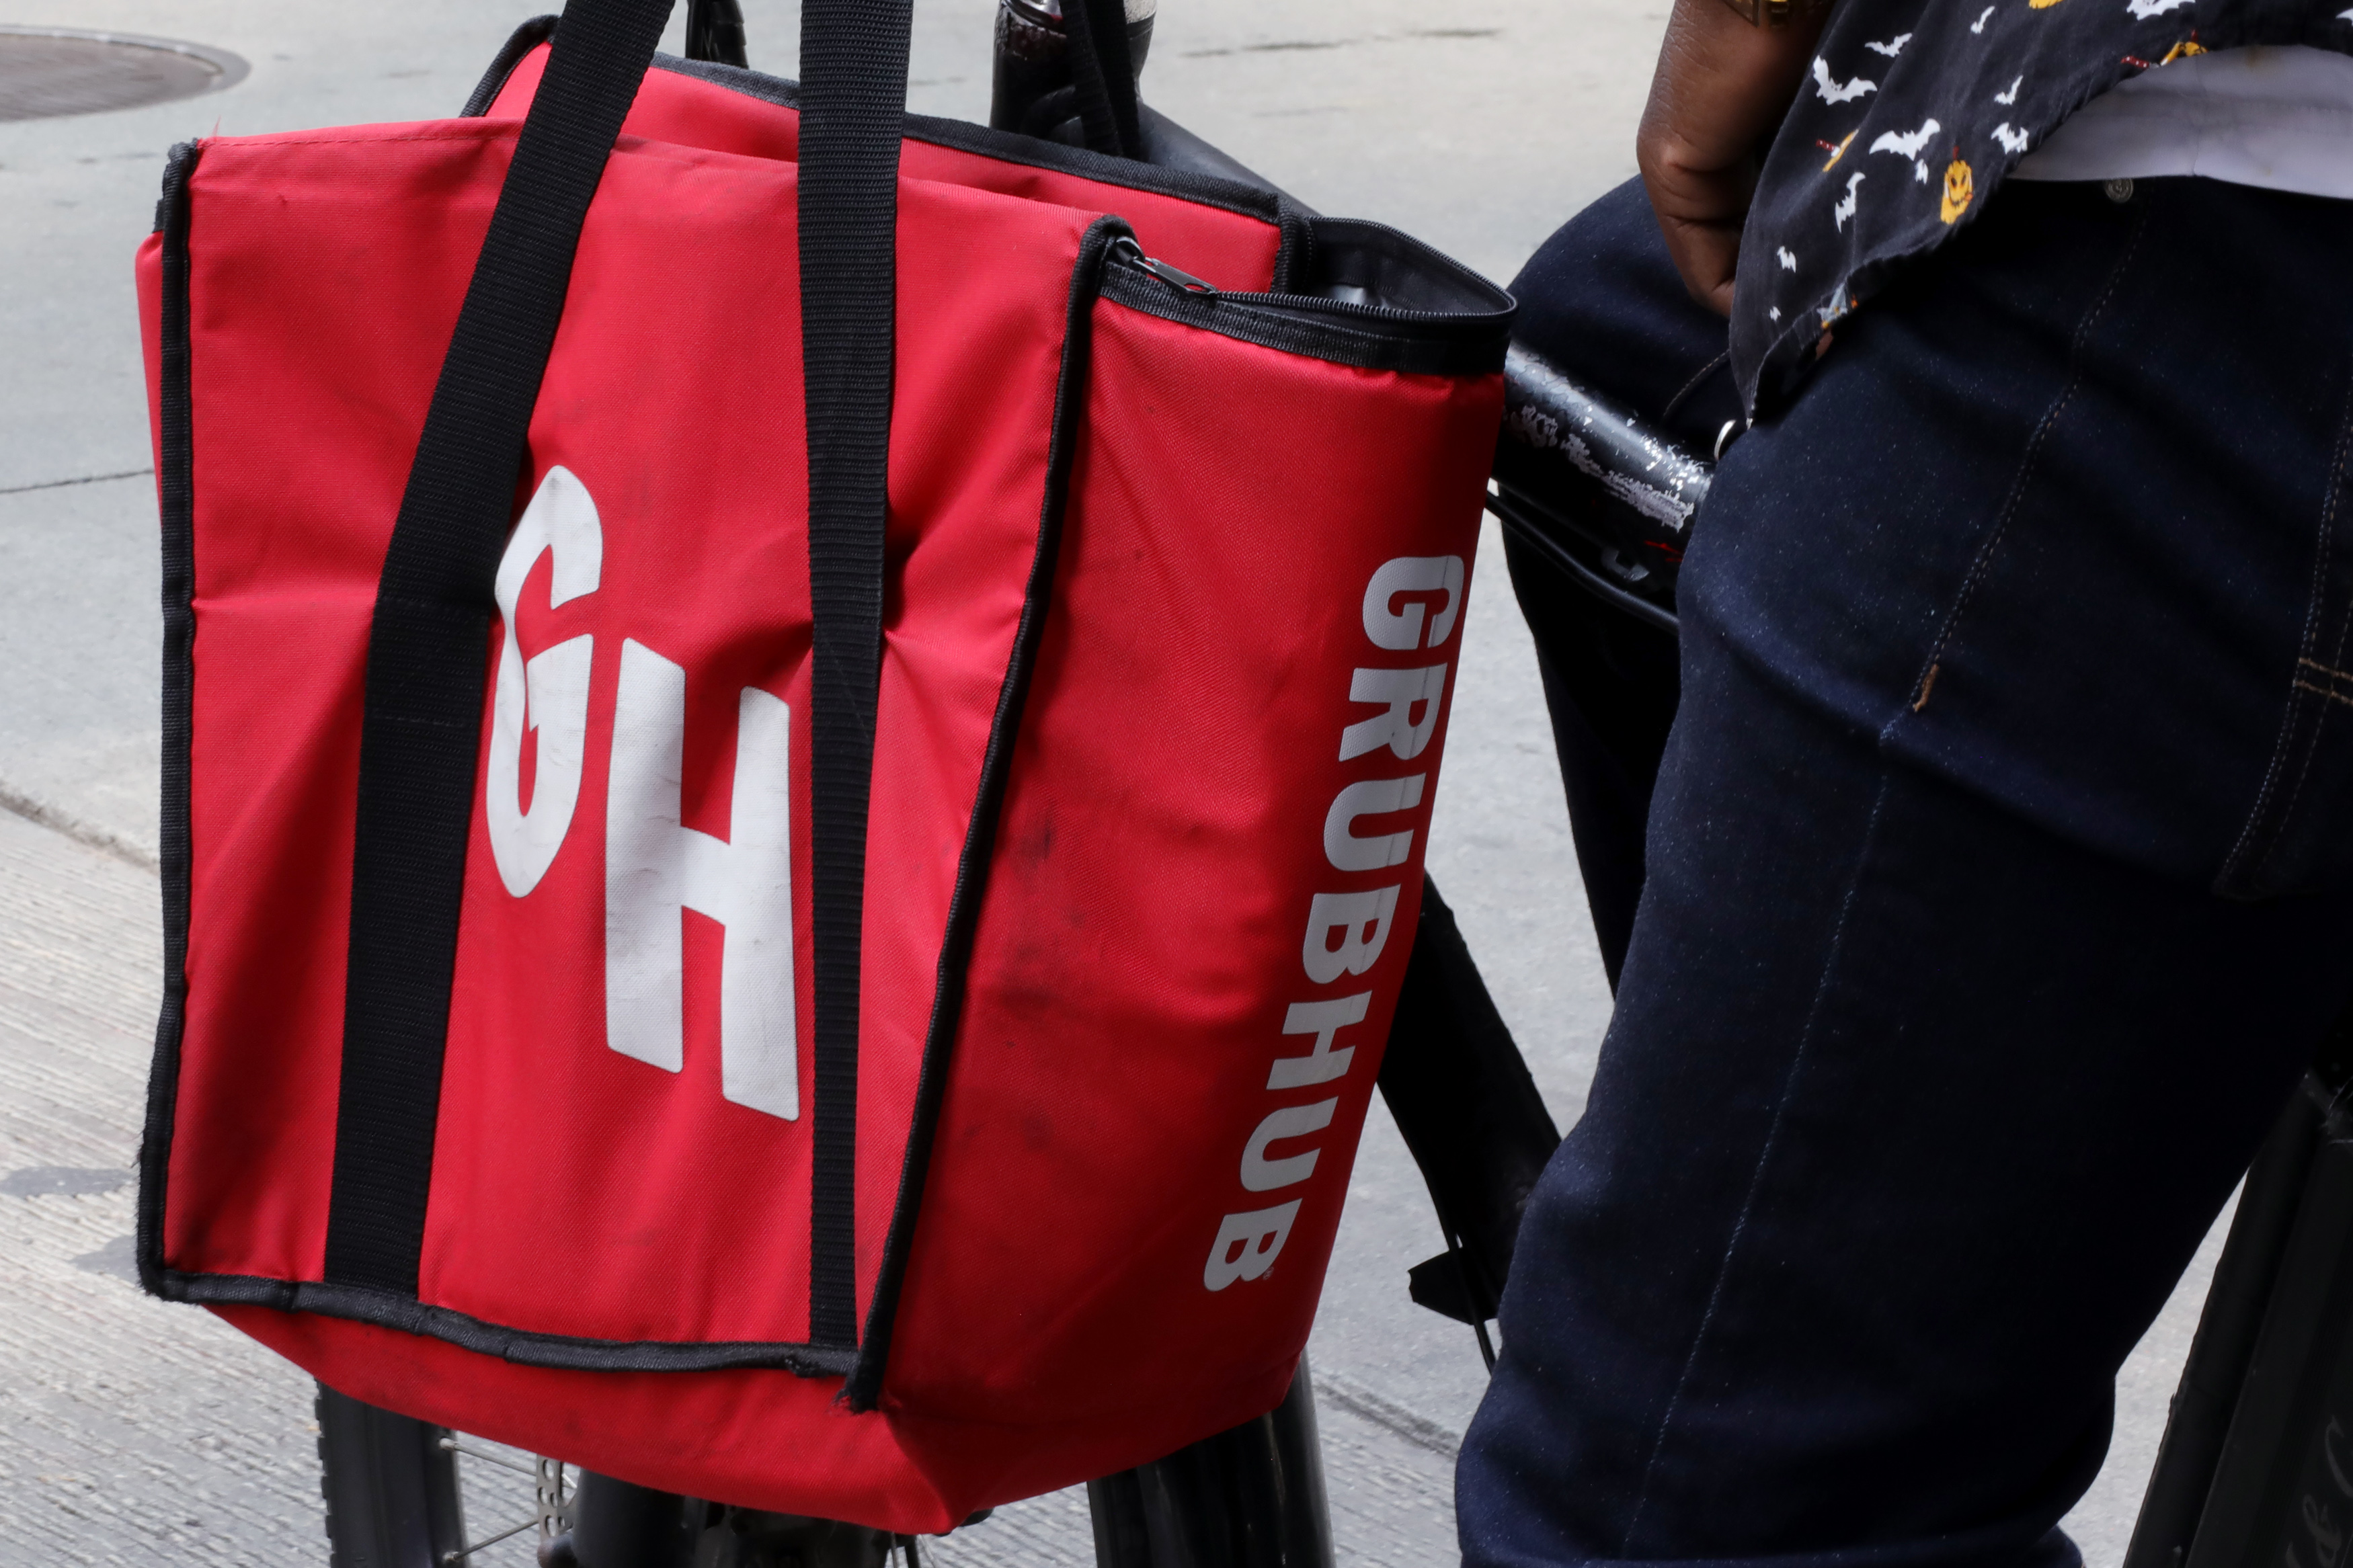 LA County sued Grubhub alleging unfair and deceptive business practices this week.